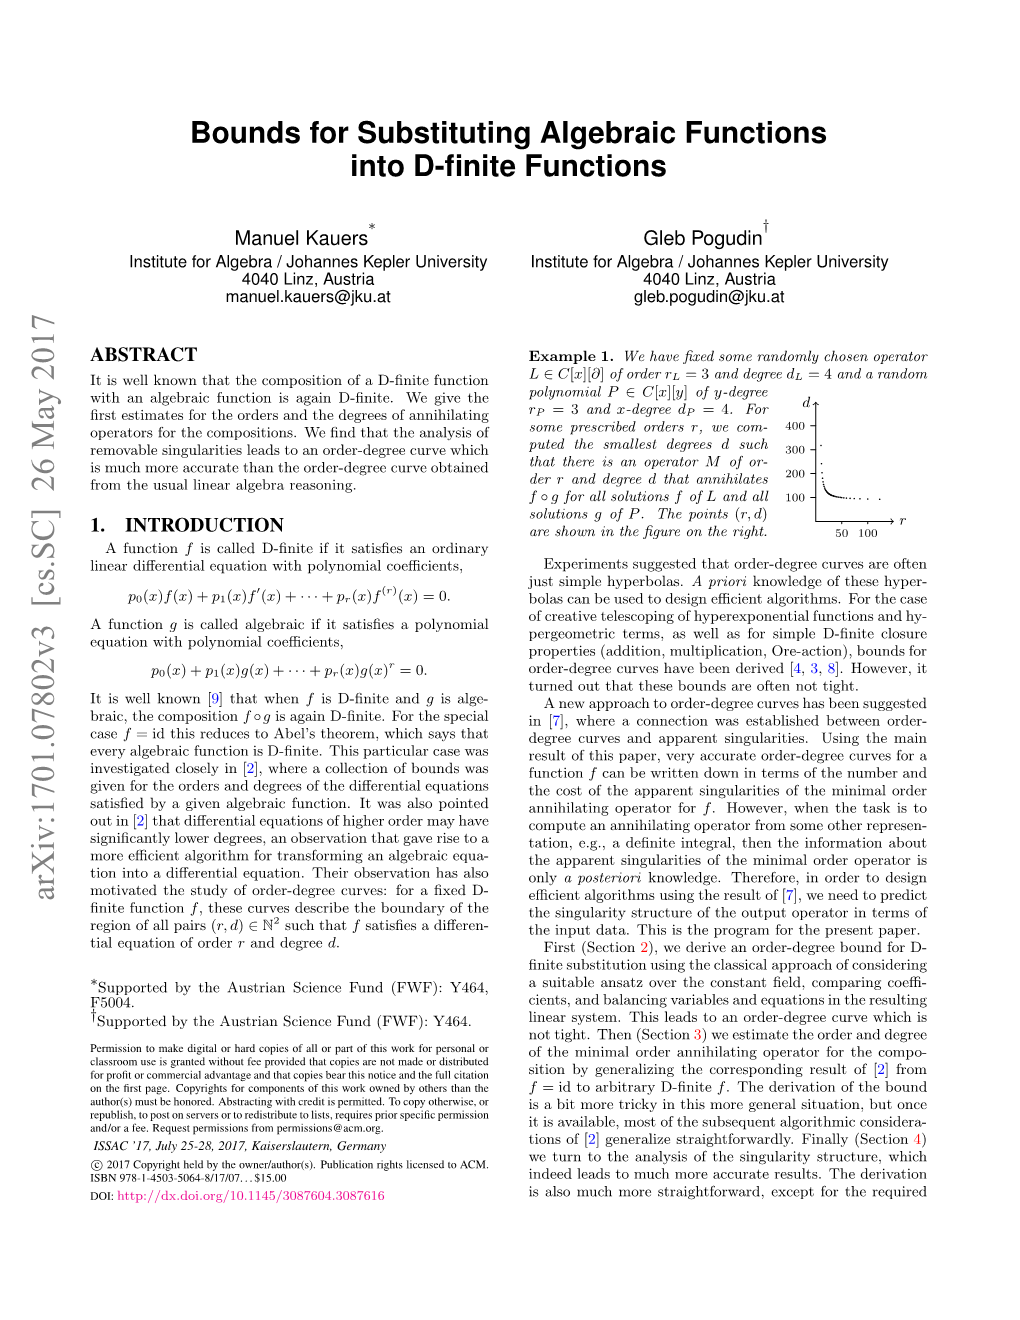 Bounds for Substituting Algebraic Functions Into D-Finite